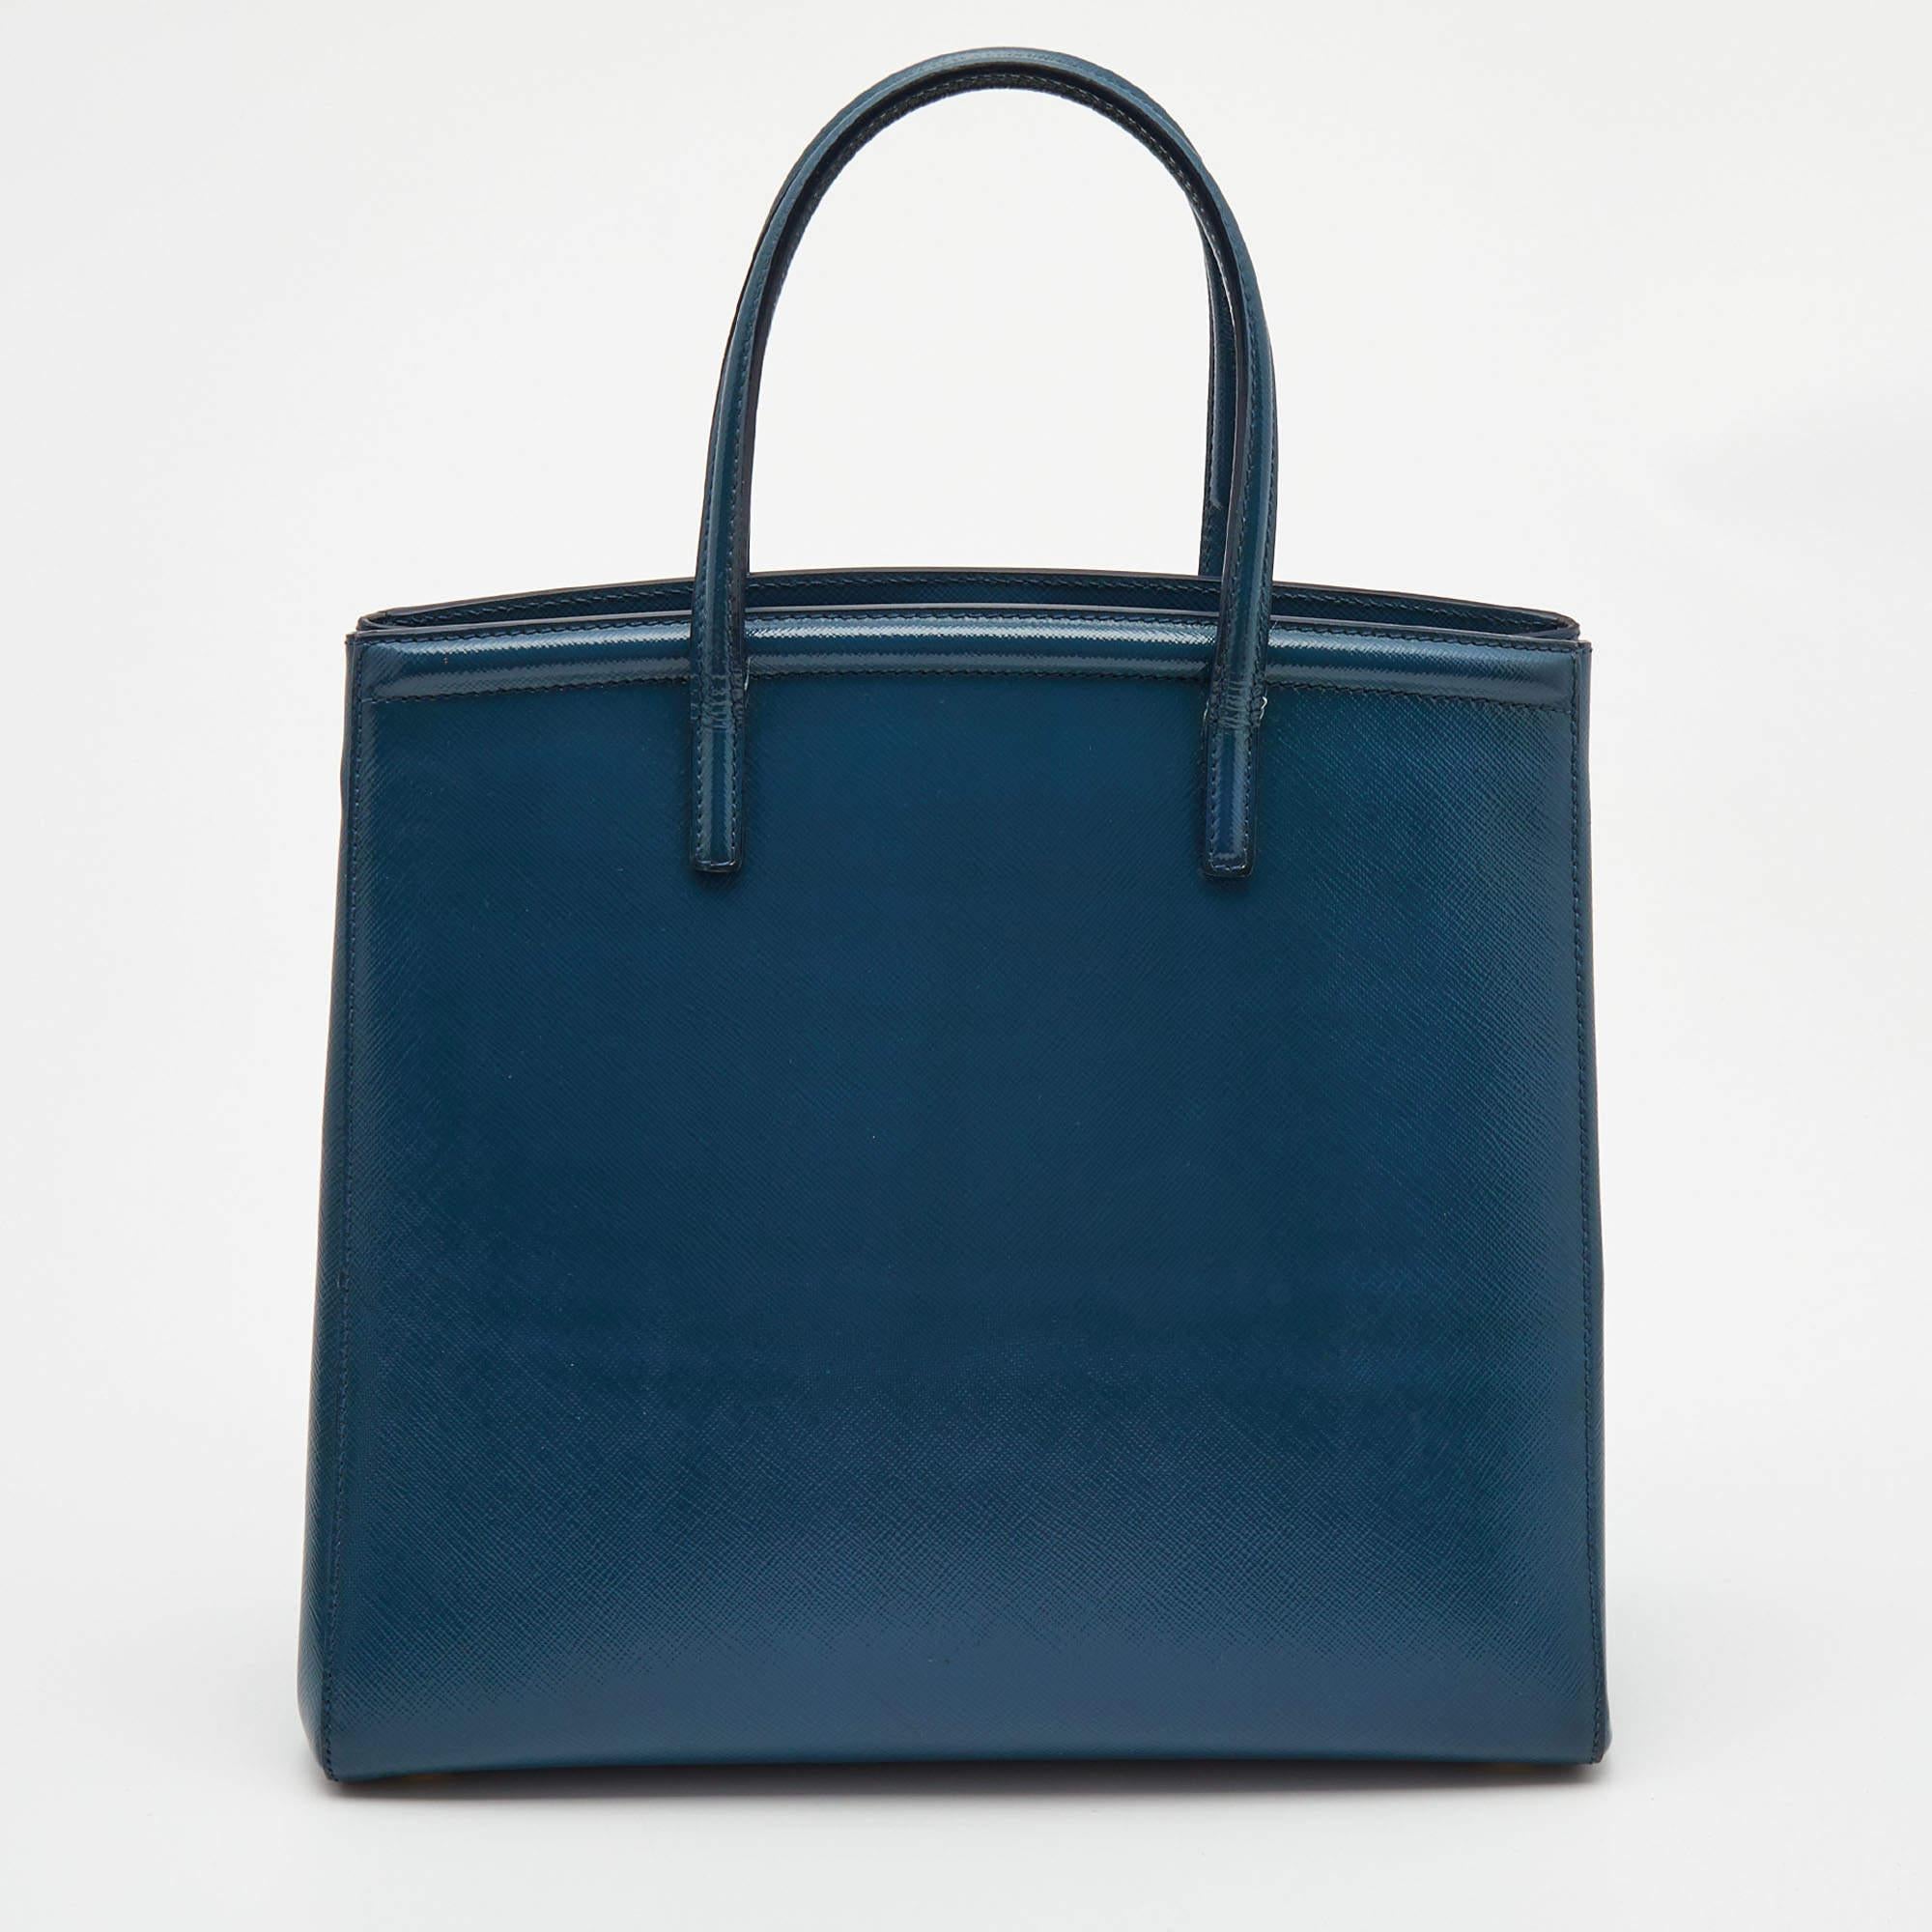 Masterfully created, this Prada tote is a style icon. Designed in a Saffiano Vernice leather body, it exudes style and class in equal measures. This delightful teal blue piece is held by two top handles and equipped with a spacious interior.

